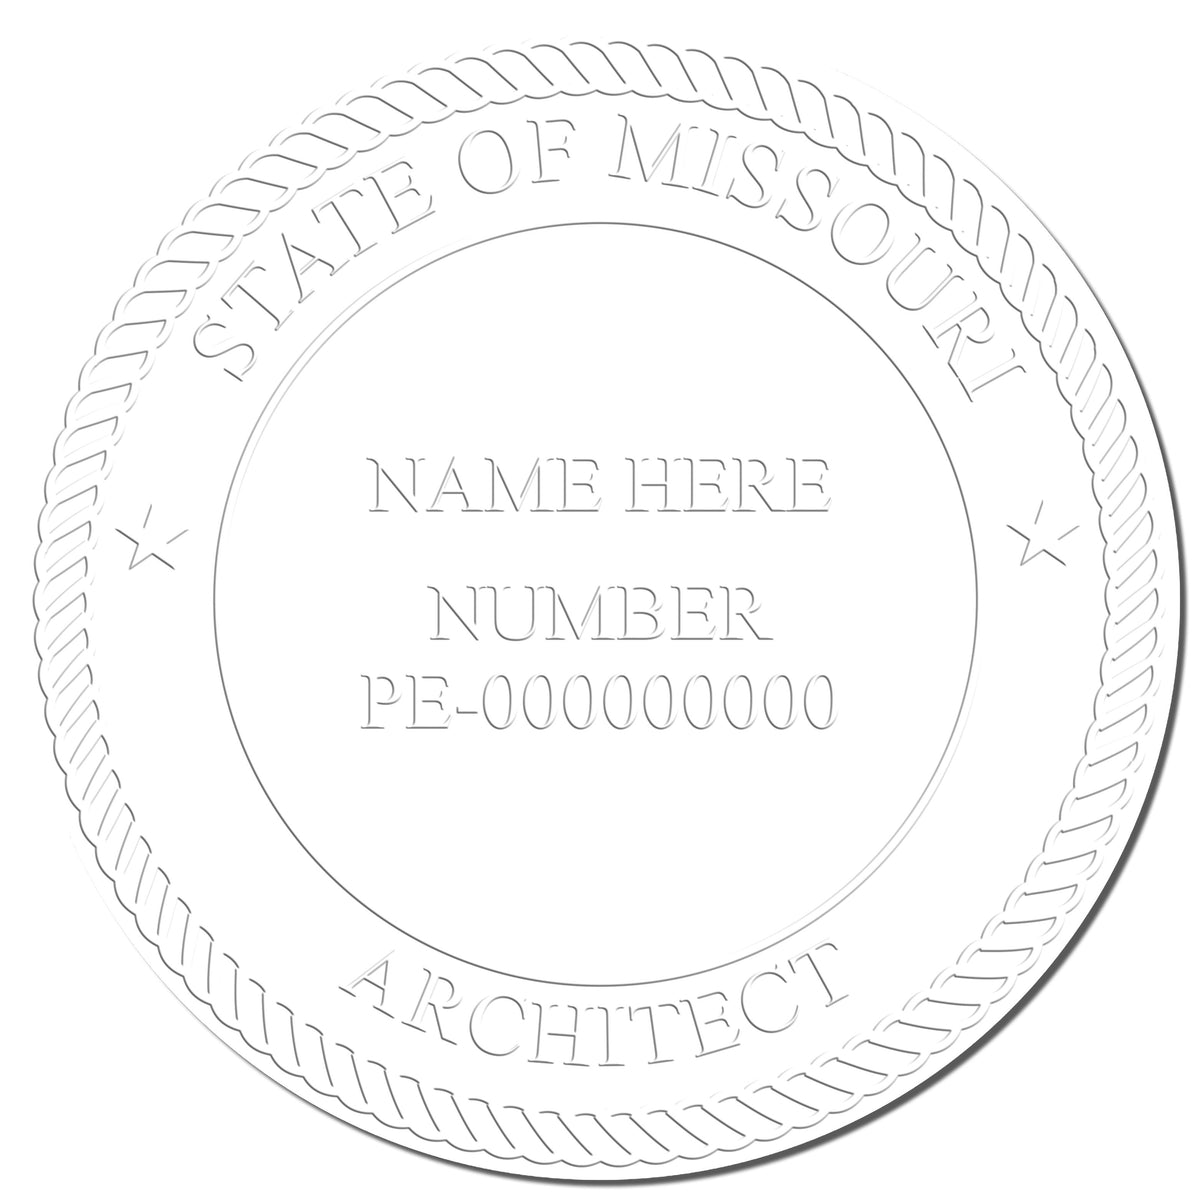 This paper is stamped with a sample imprint of the Hybrid Missouri Architect Seal, signifying its quality and reliability.